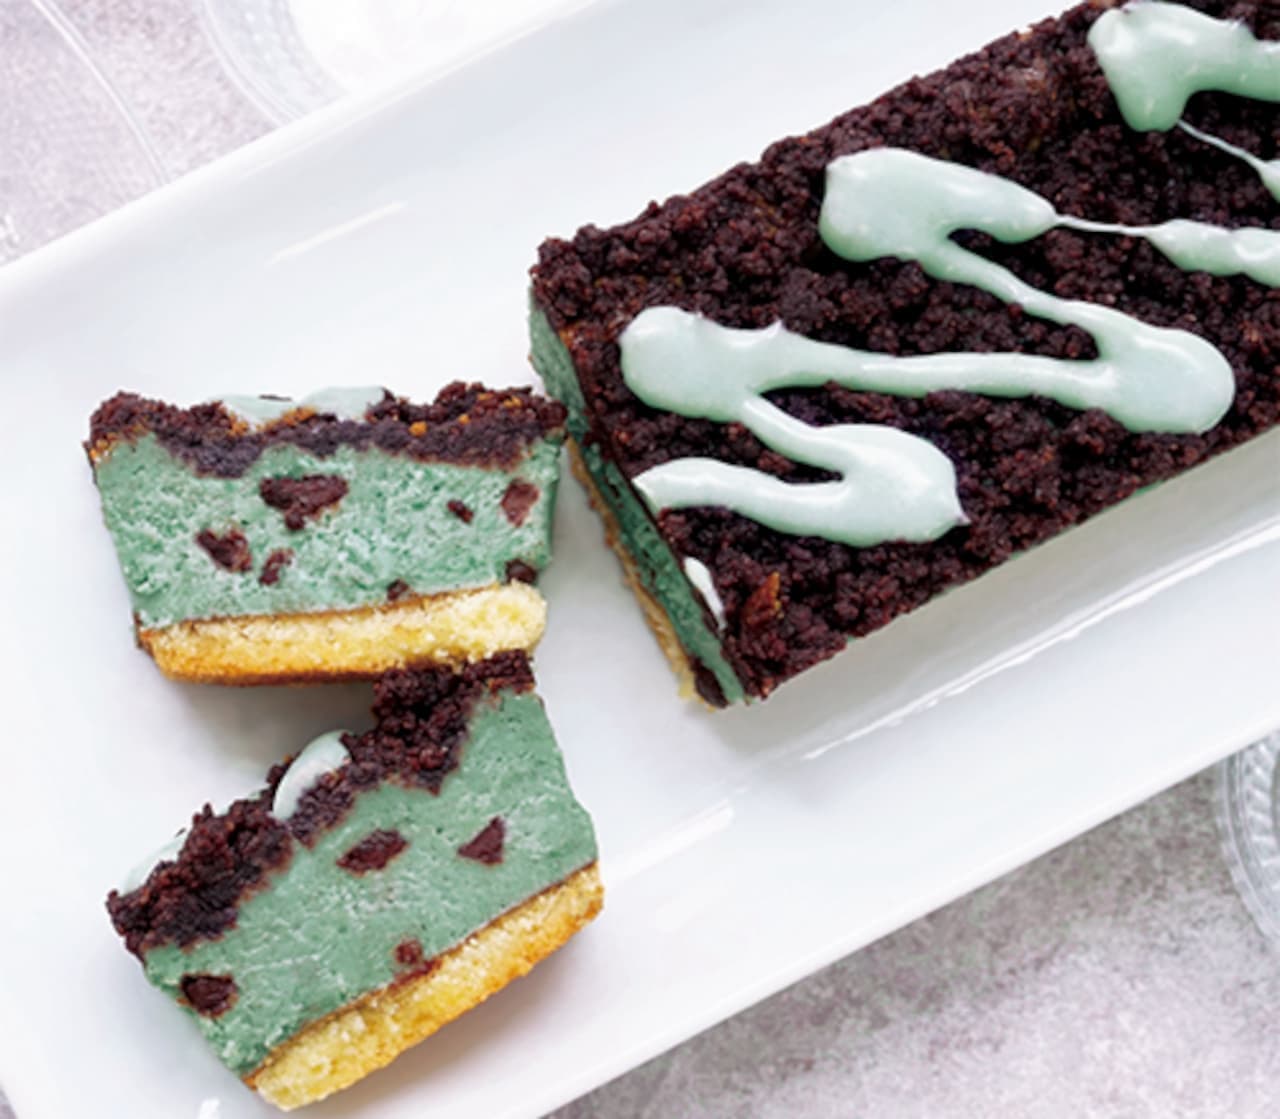 Seijo Ishii "Choco Mint Cheesecake with Japanese Mint Leaf Paste